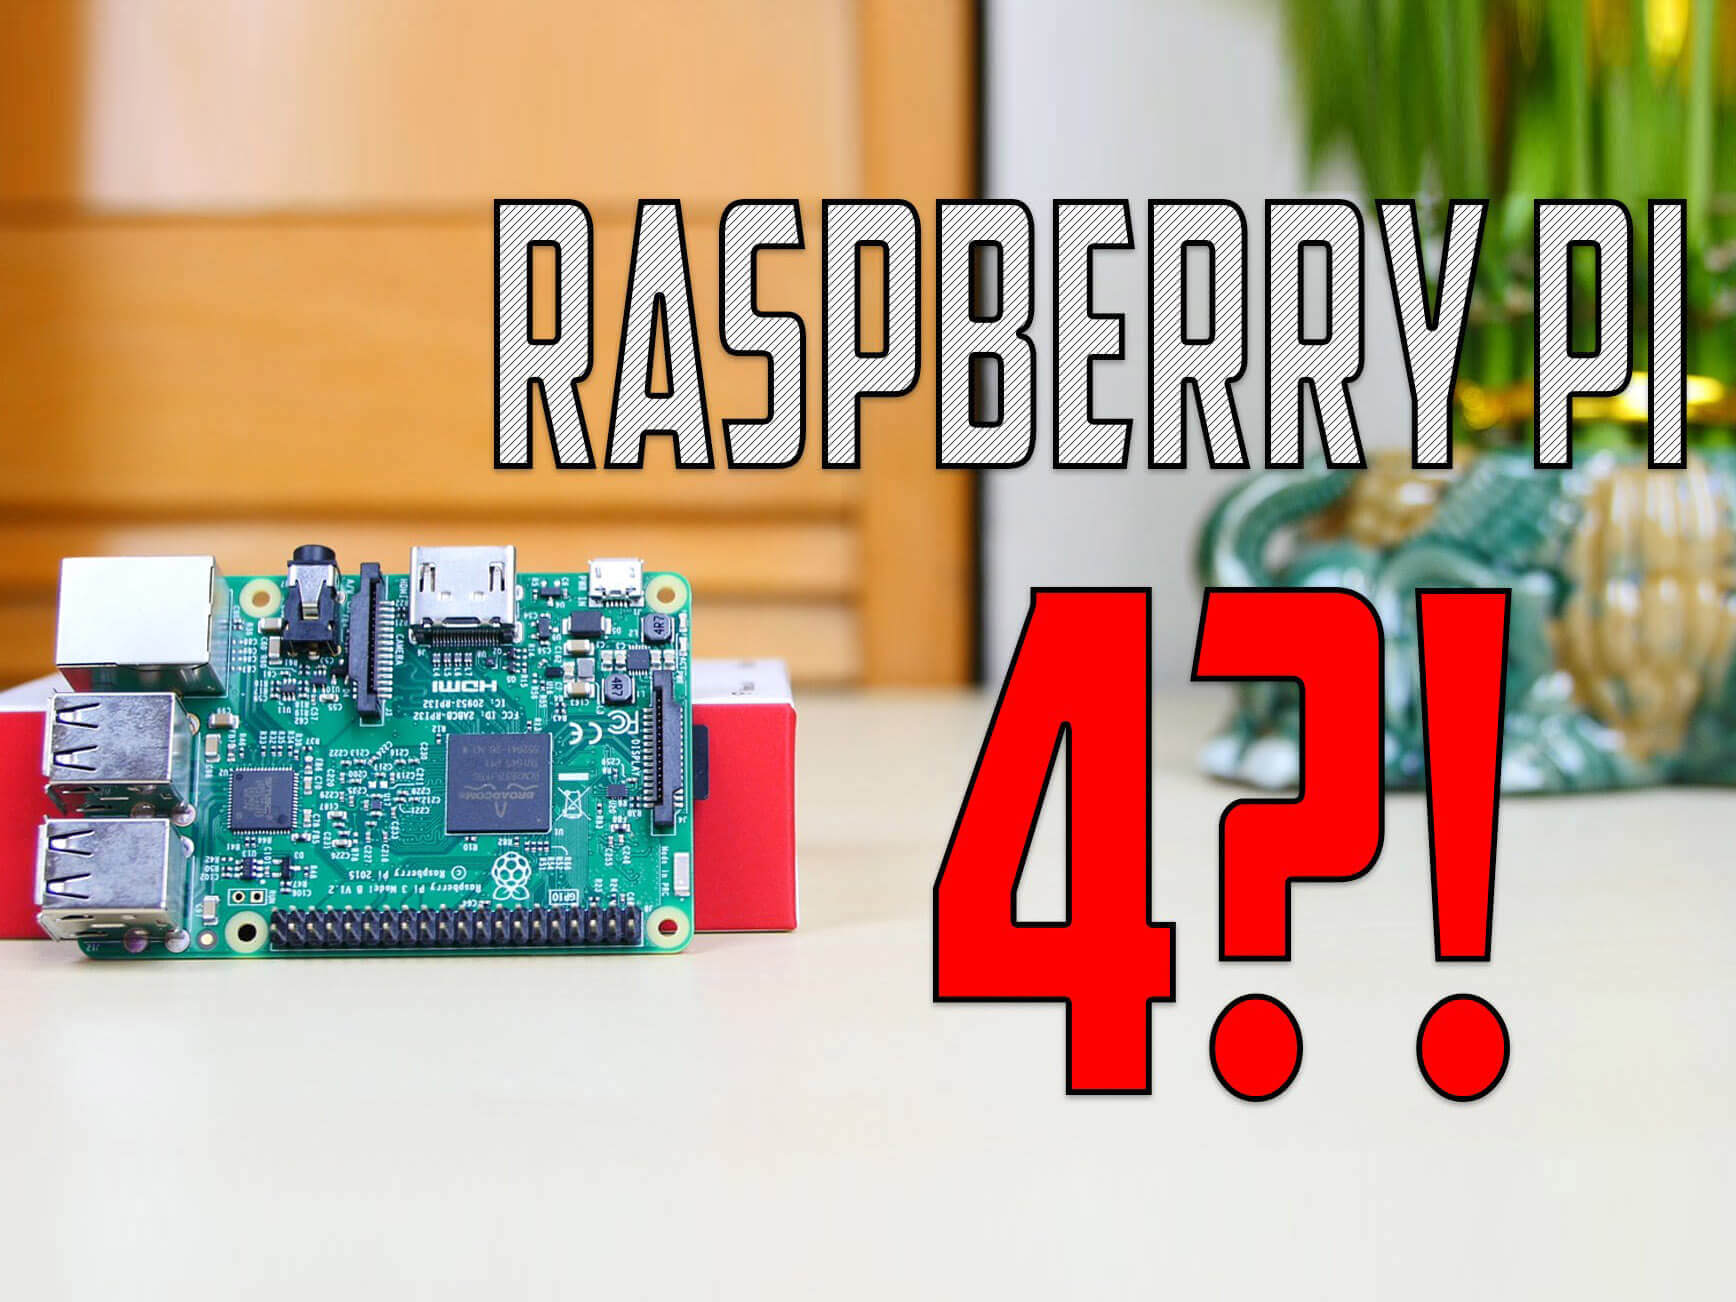 What would be the Raspberry Pi 4 like?